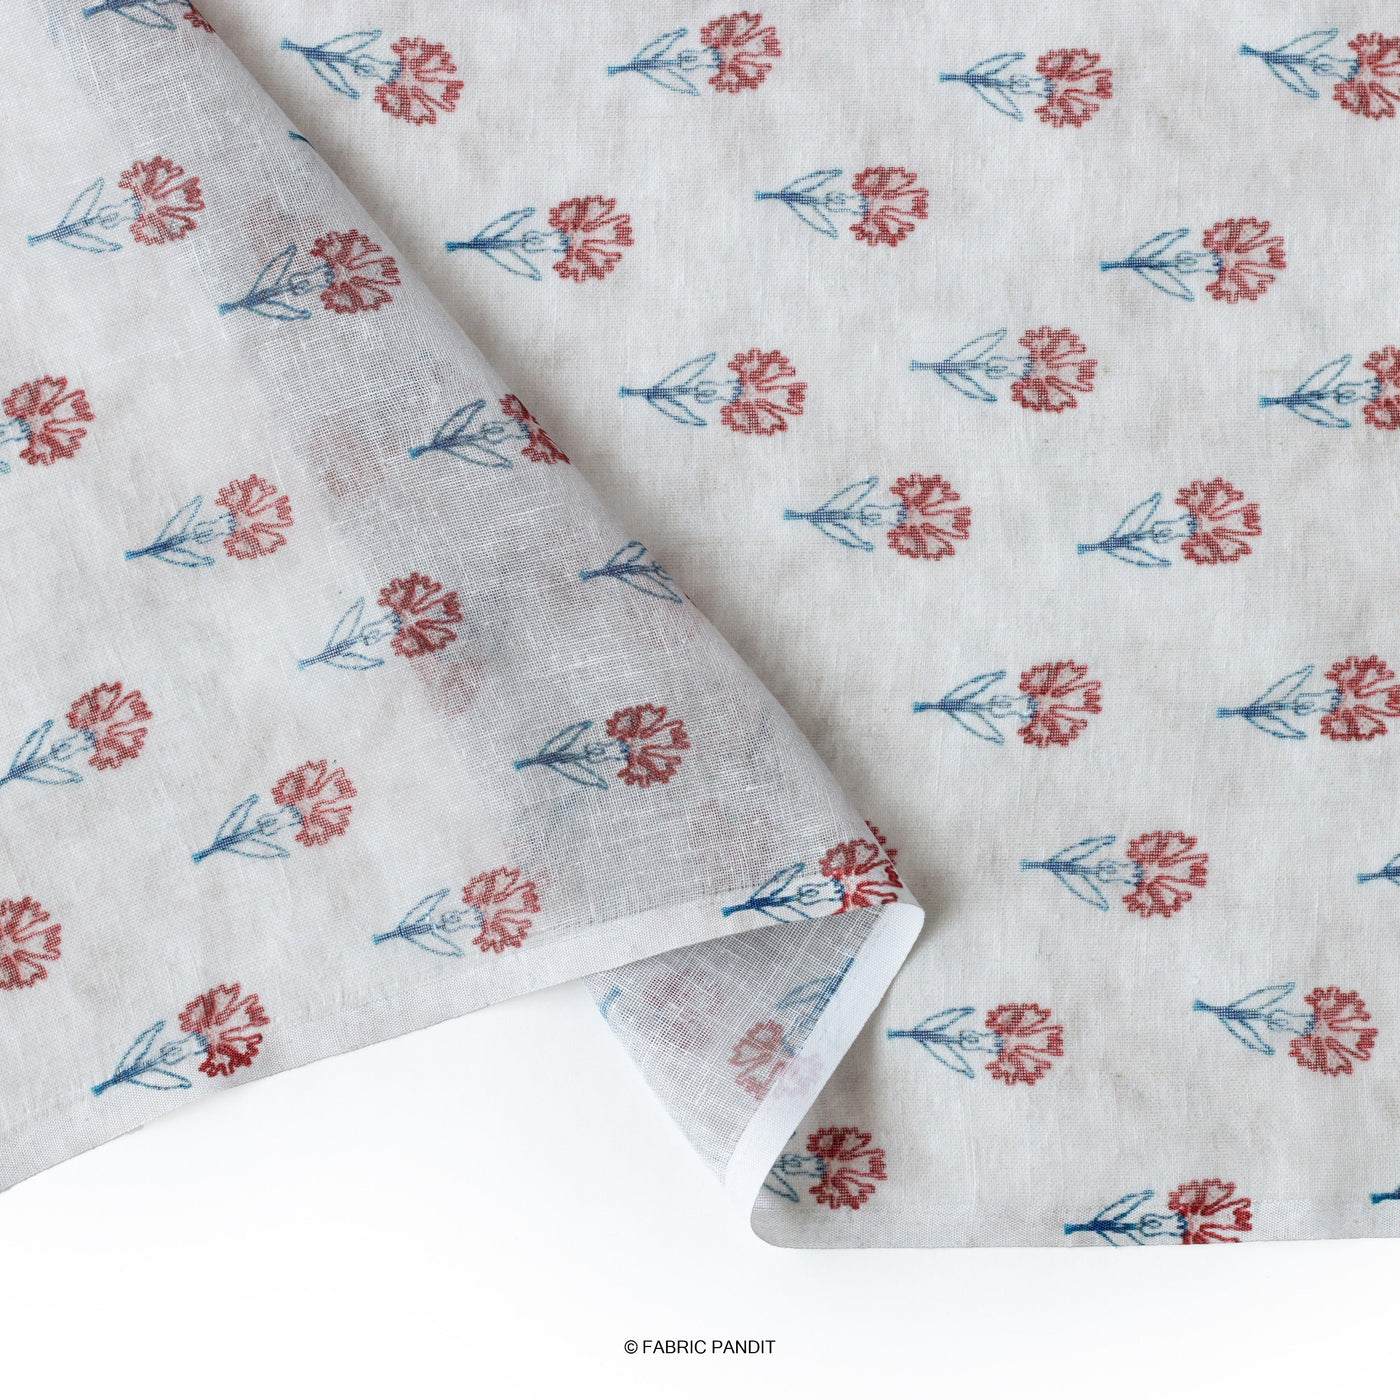 Fabric Pandit Cut Piece 0.25M (CUT PIECE) Grey And Red Orchids Digital Printed Linen Neps Fabric (Width 44 Inches)